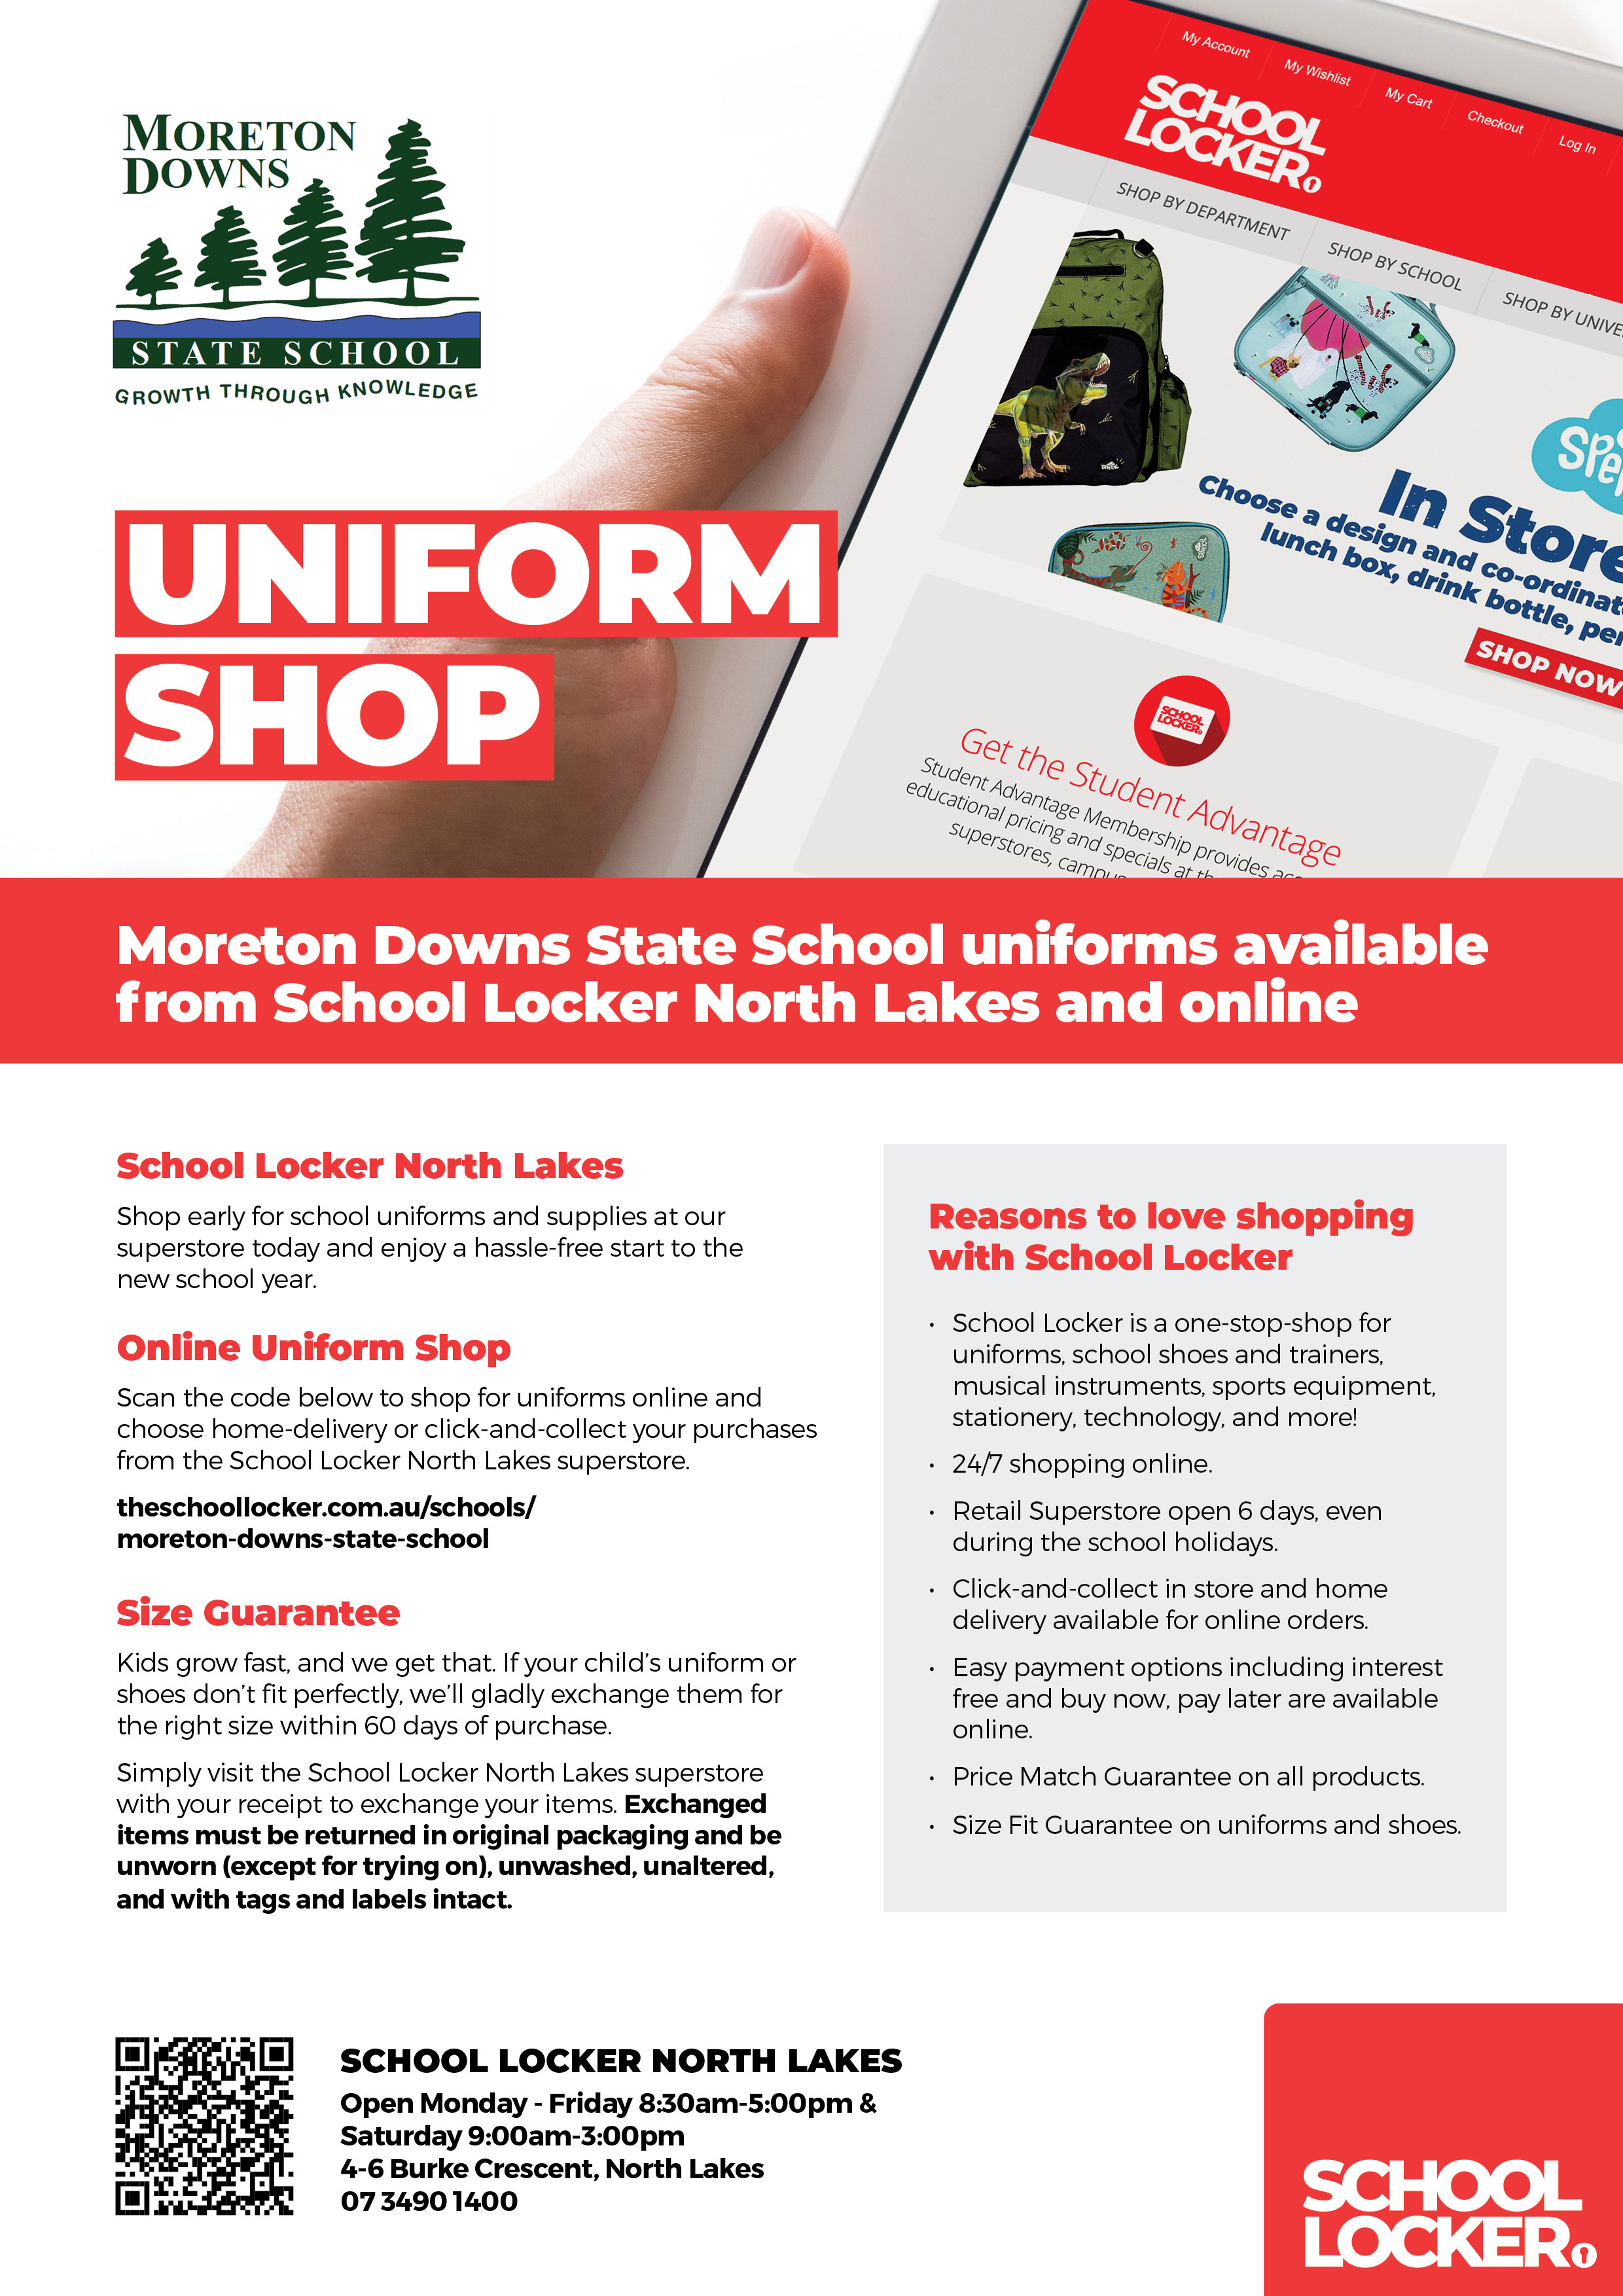 03_IS-176622_A4-Flyer_Moreton-Downs-State-School_North-Lakes.jpg